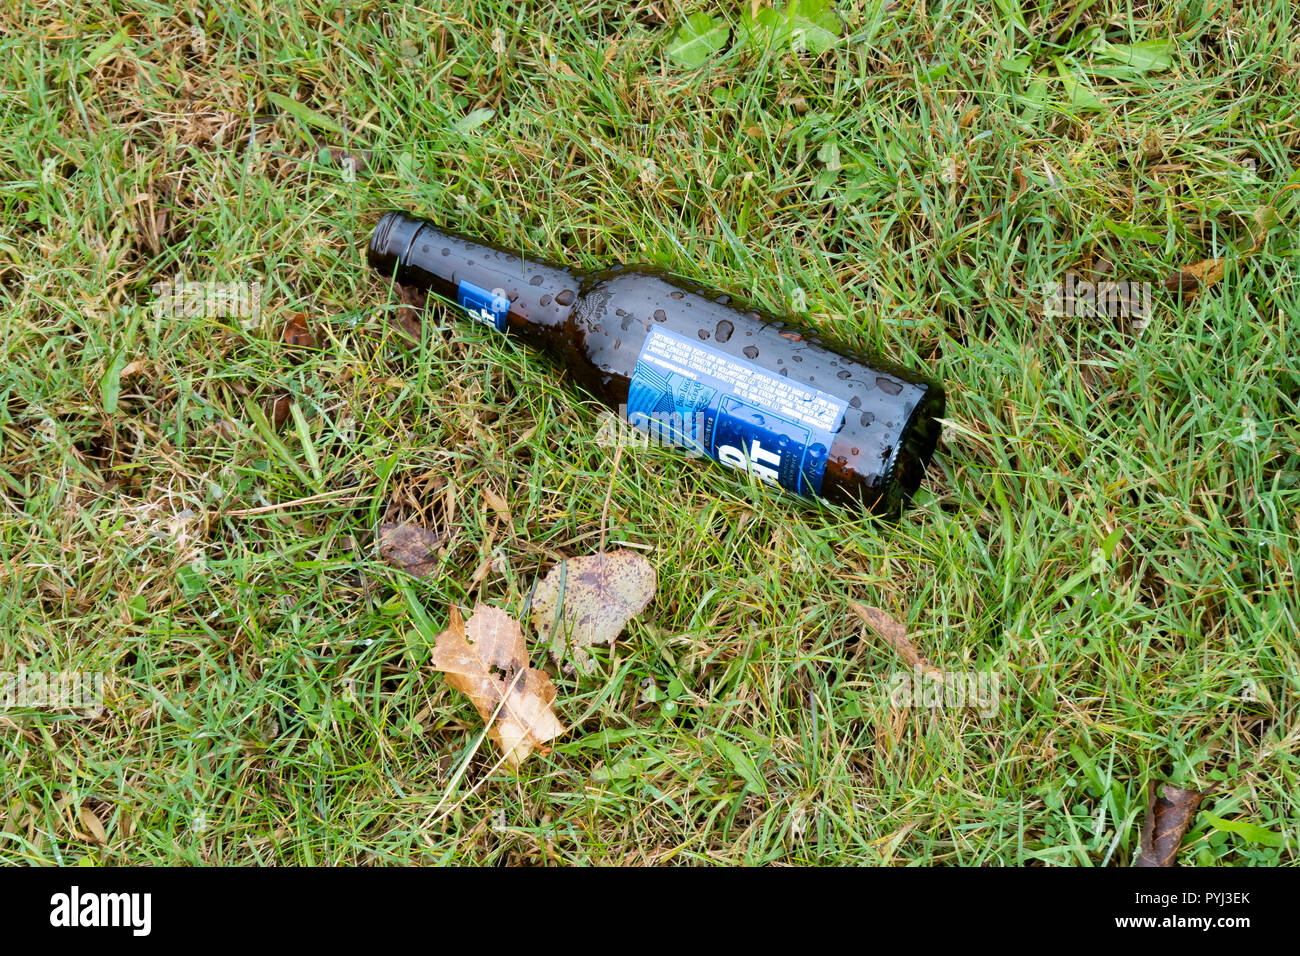 A wet empty Bud Light beer bottle dropped on a wet lawn,, littering concept. Stock Photo